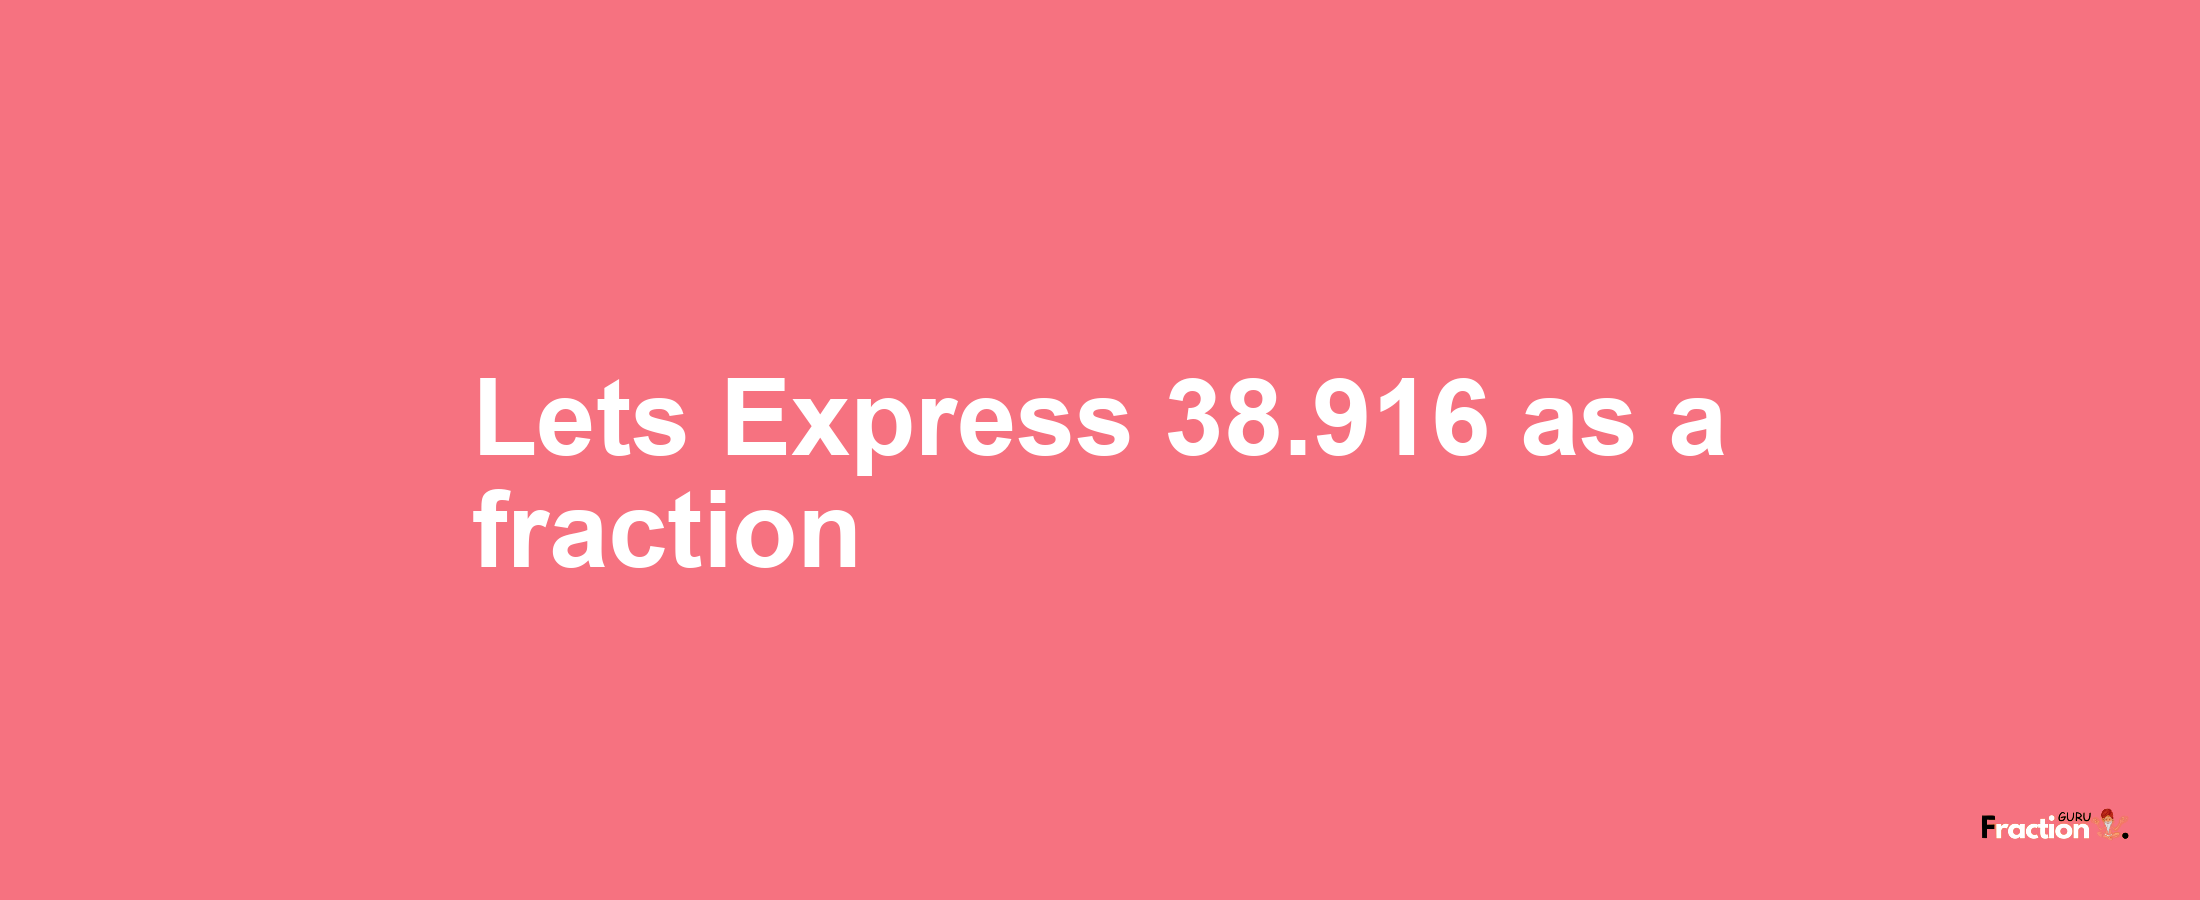 Lets Express 38.916 as afraction